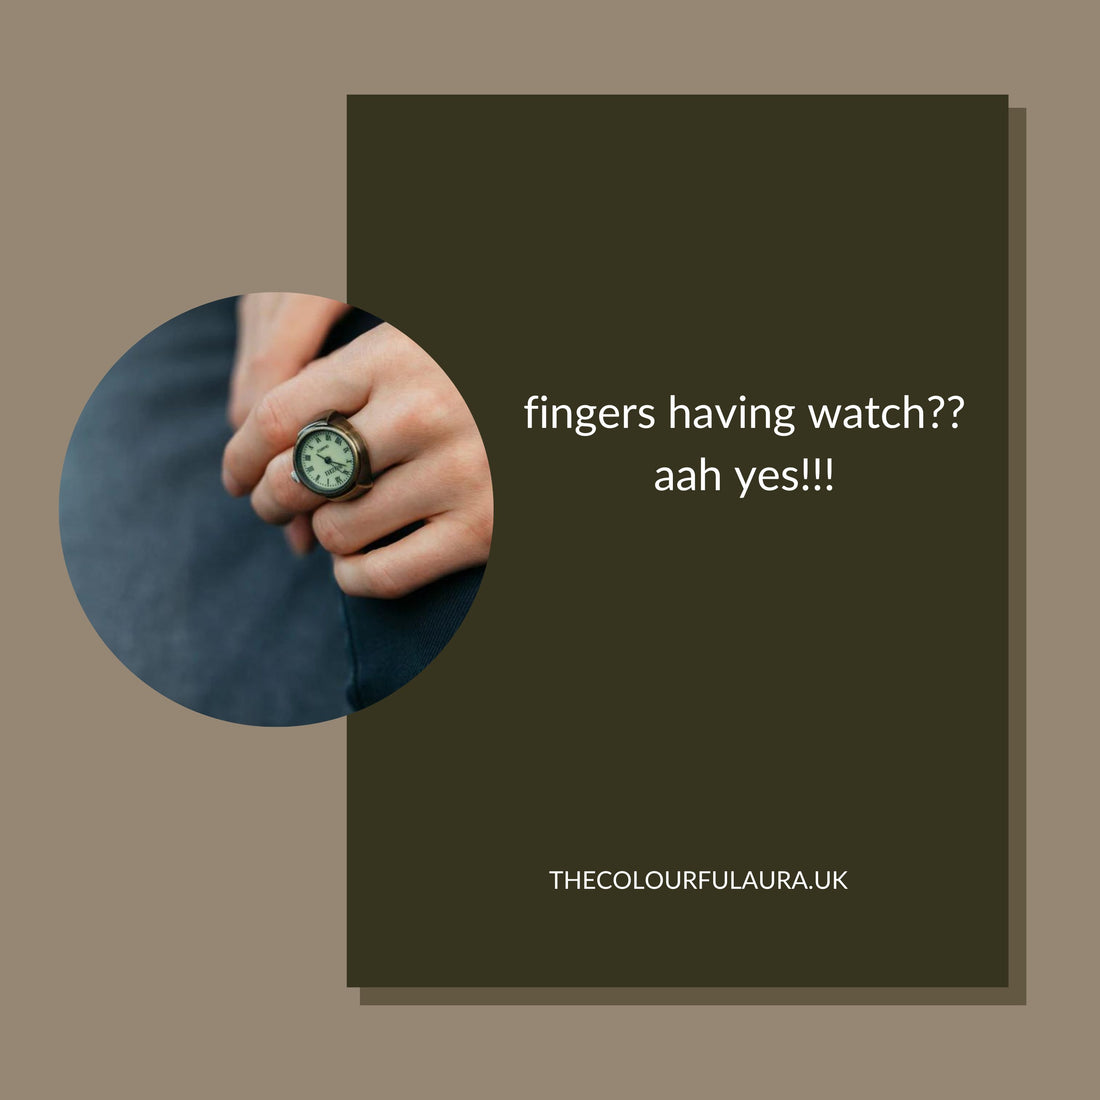 WATCH IN THE FINGERS